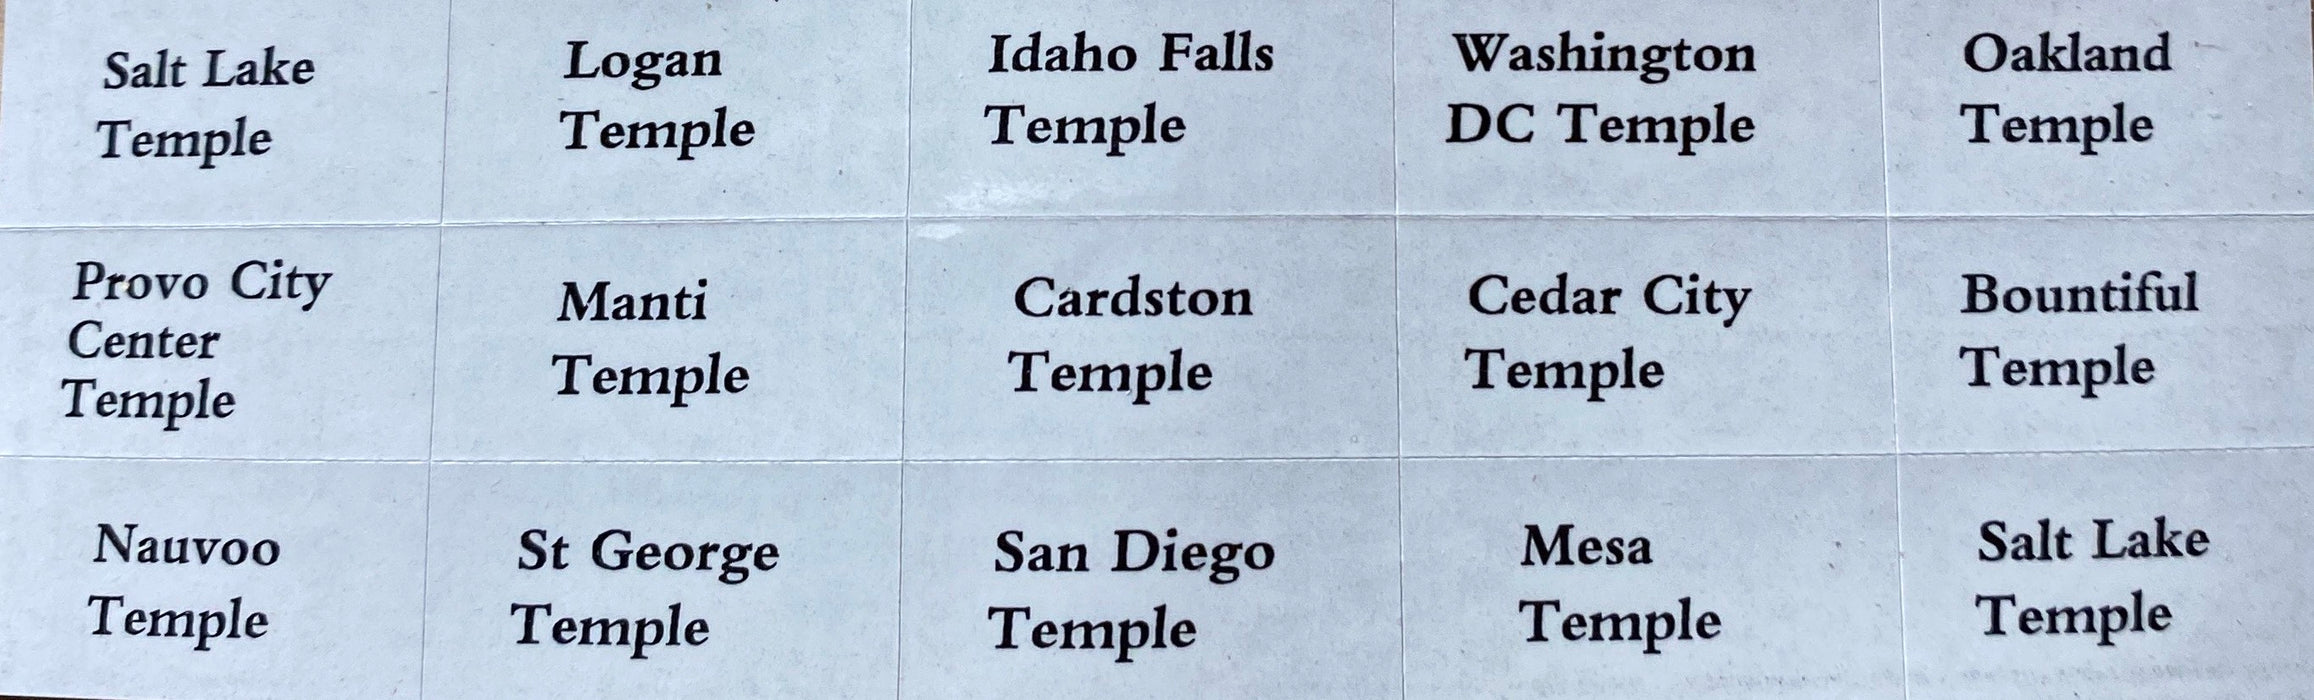 Temple Name Plates